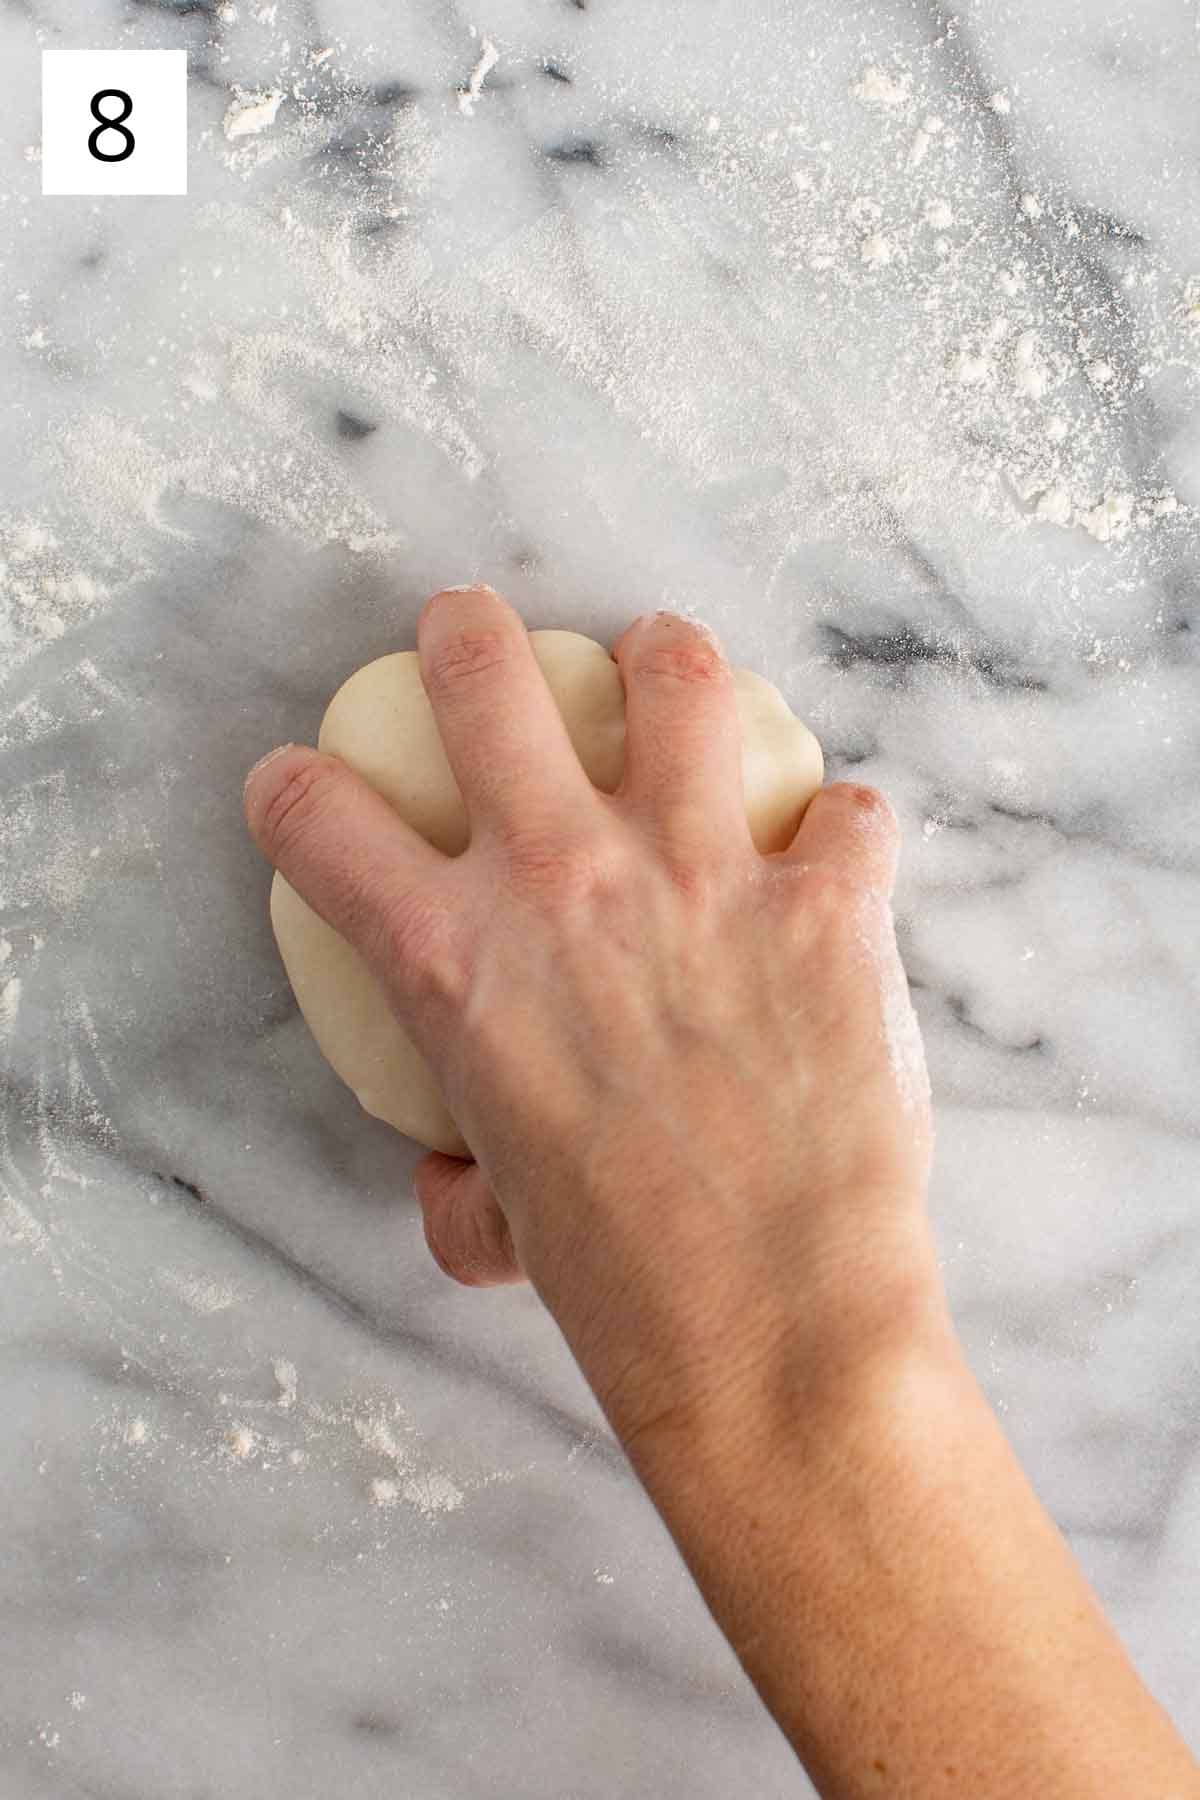 Prepping pizza dough for rising.